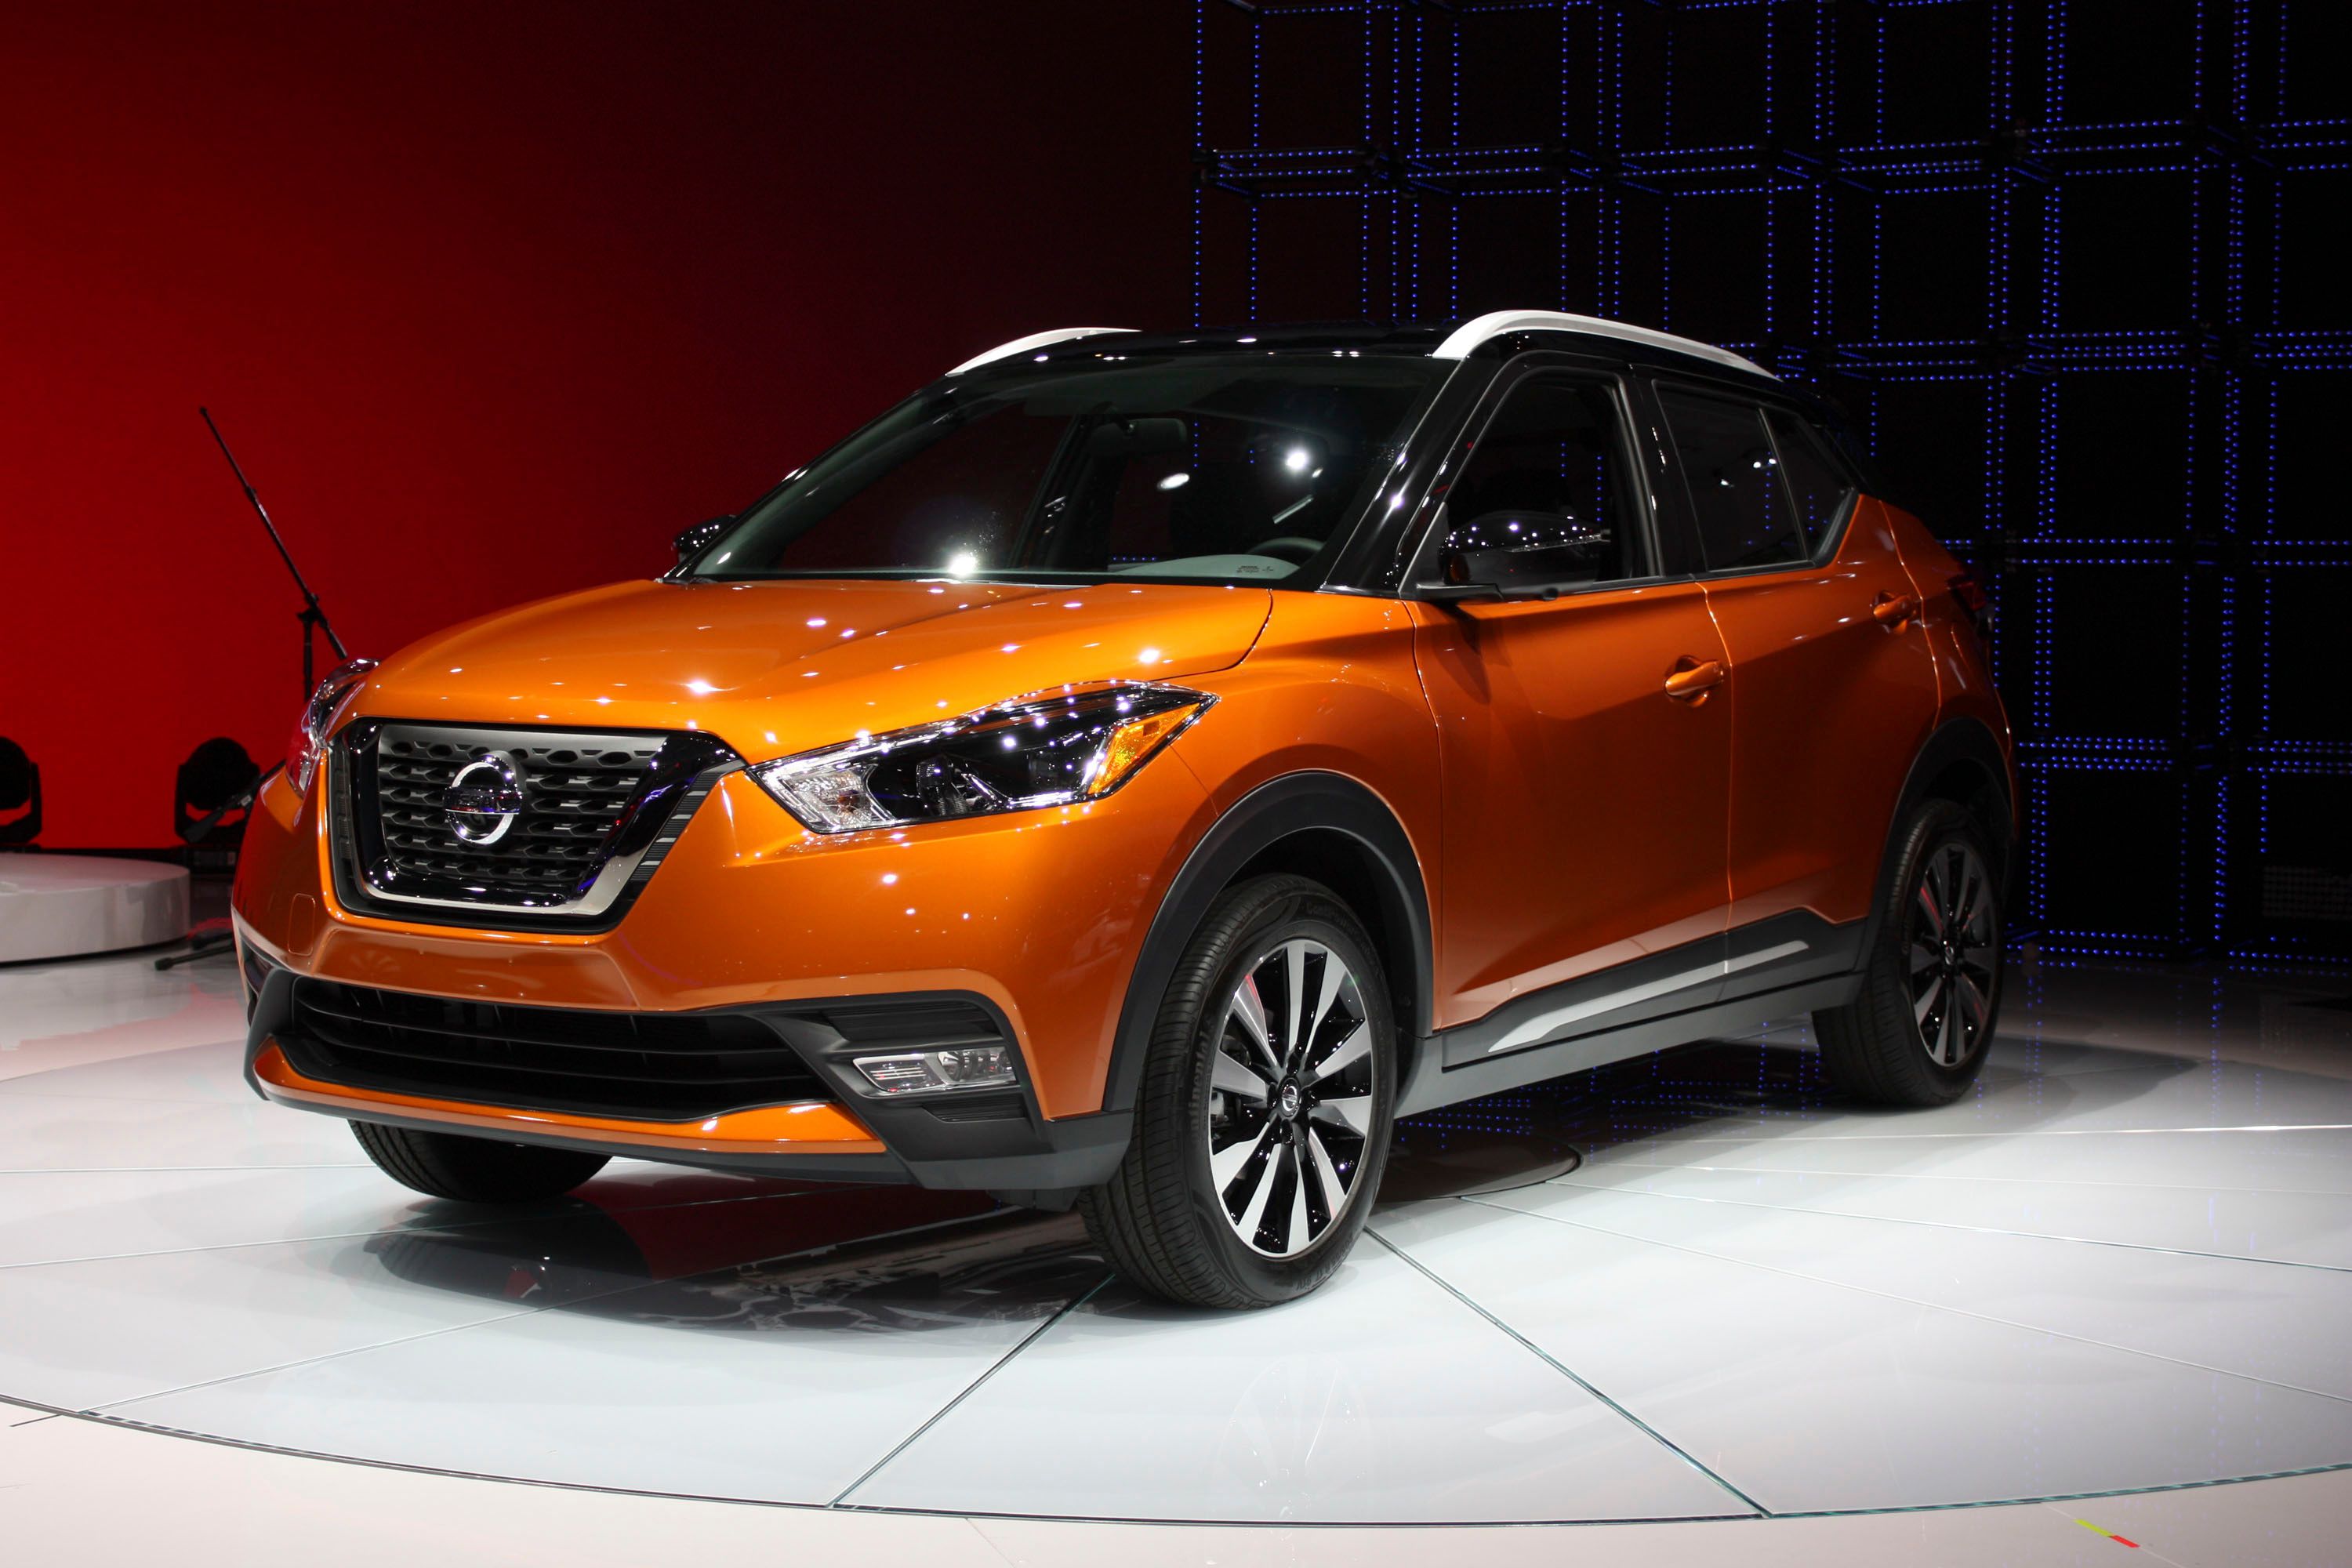 More subdued styling versus the Juke